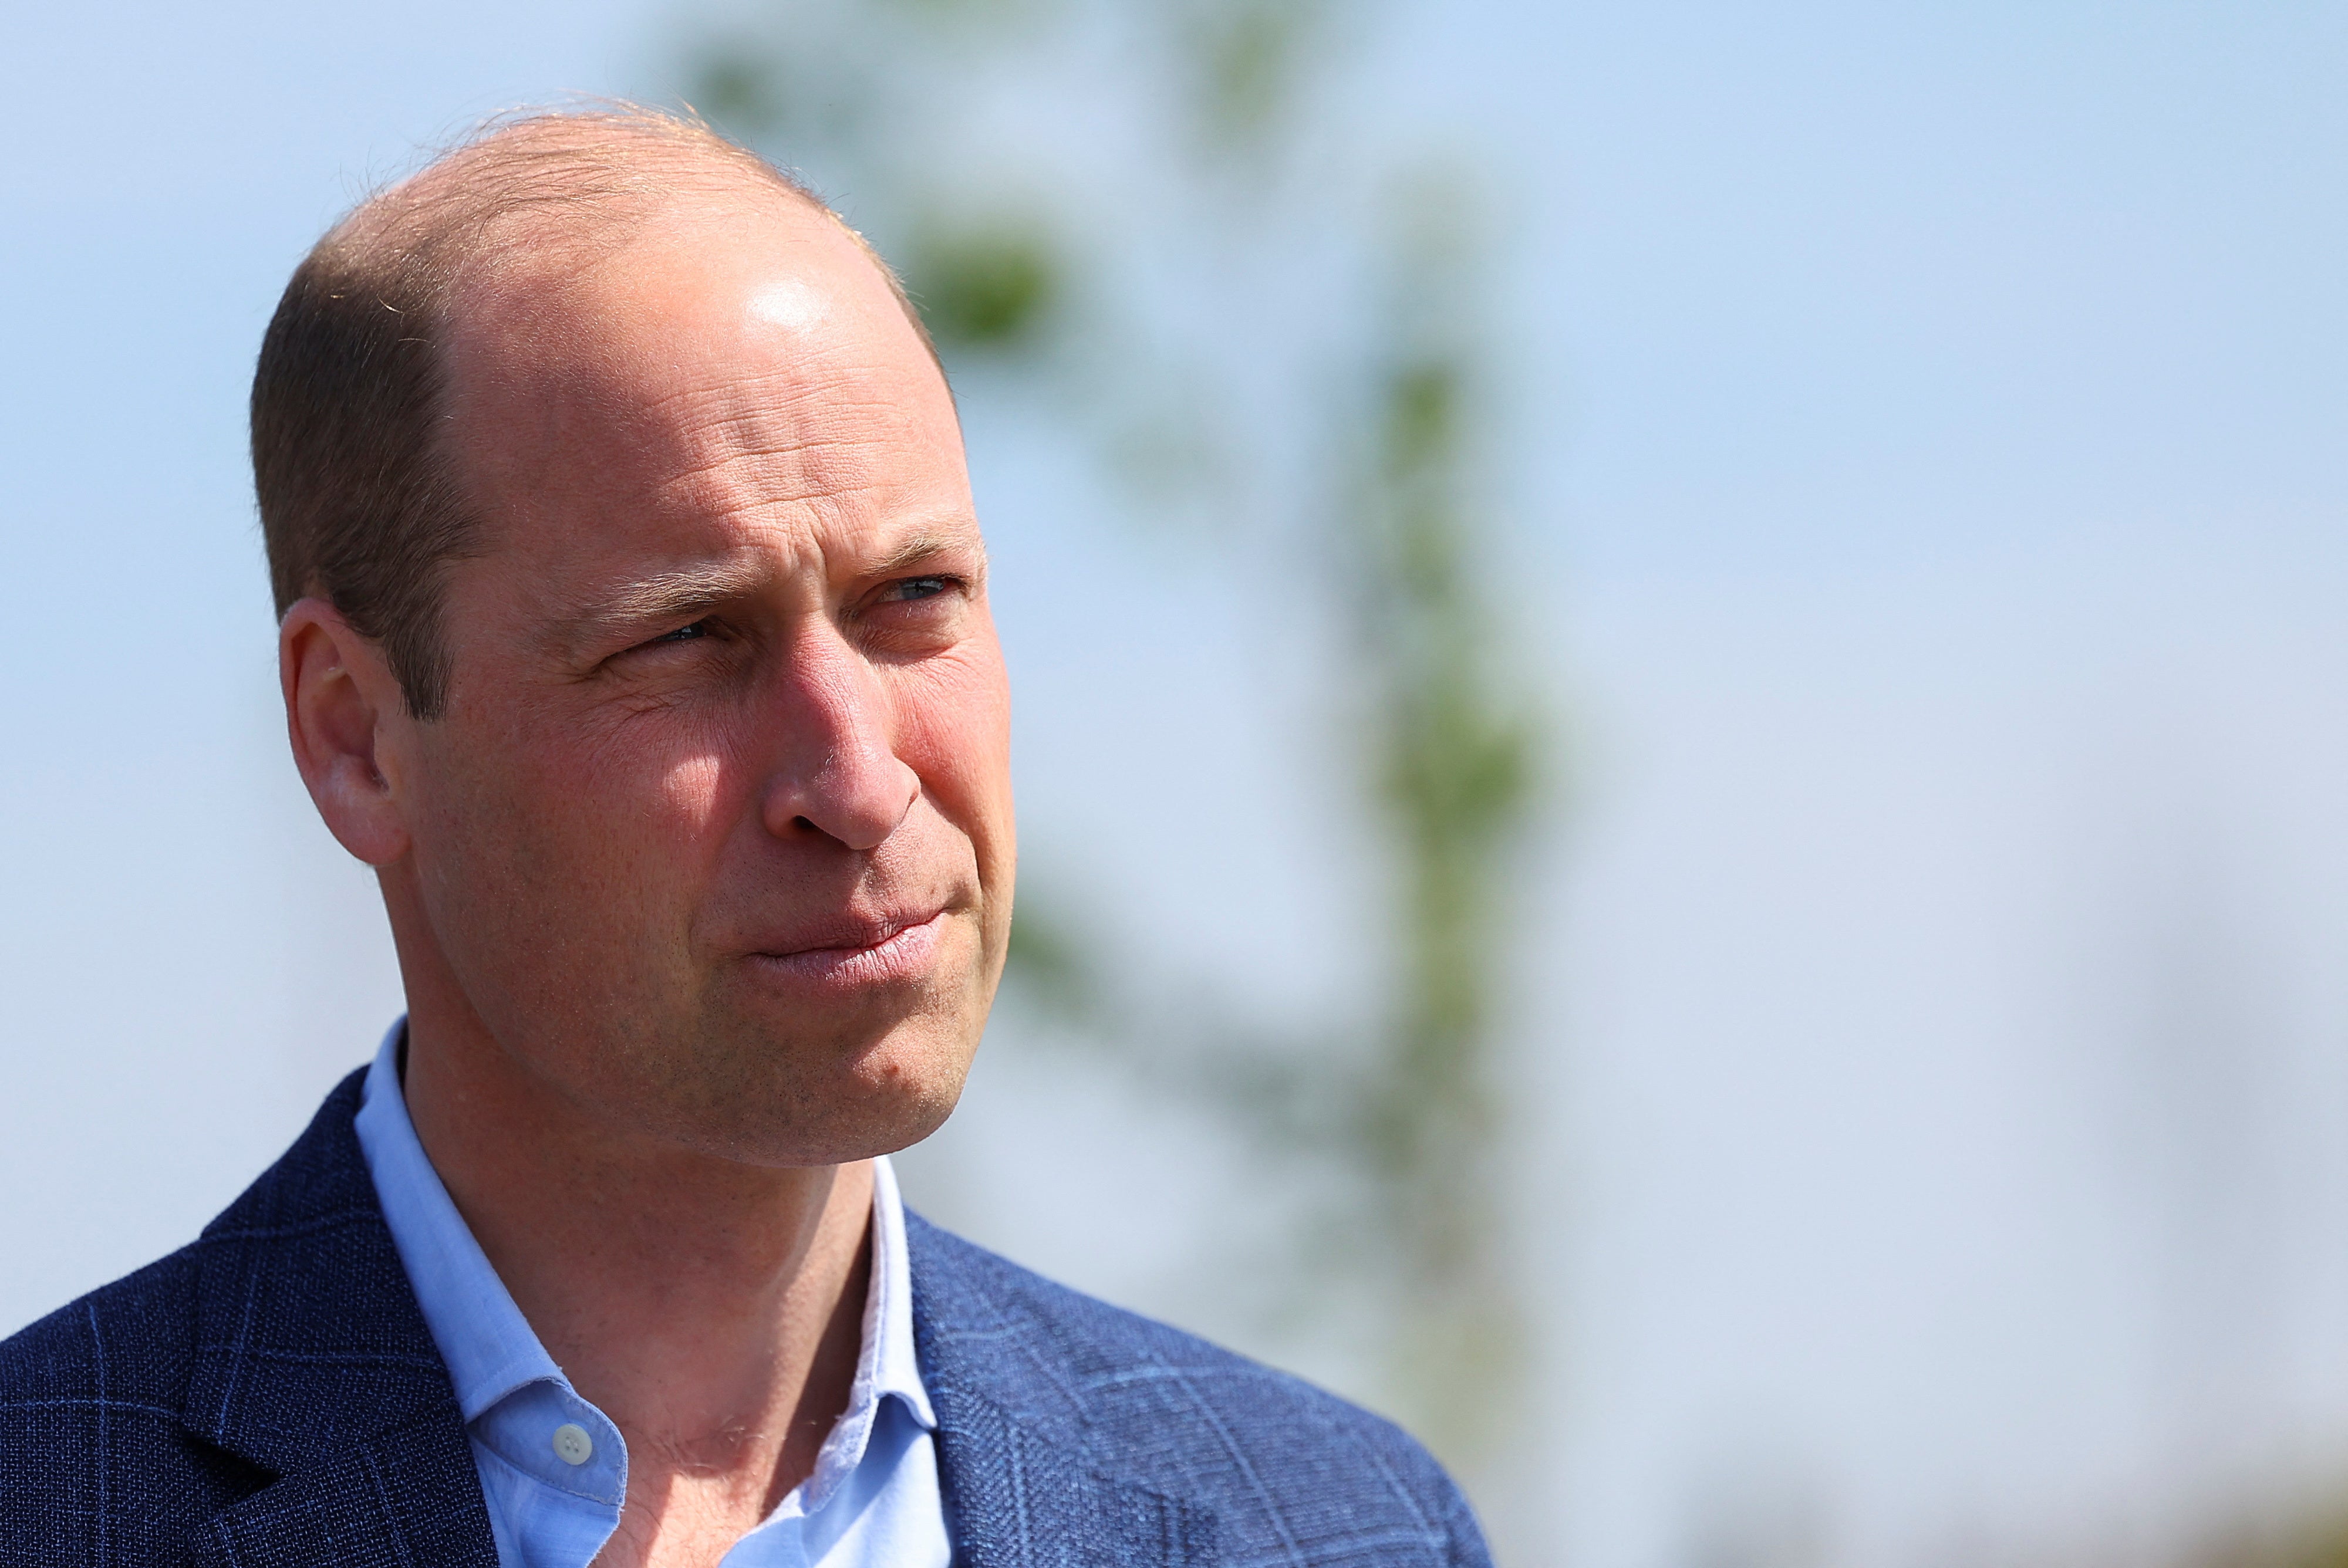 Prince William paid a secret visit to MI6 yesterday afternoon